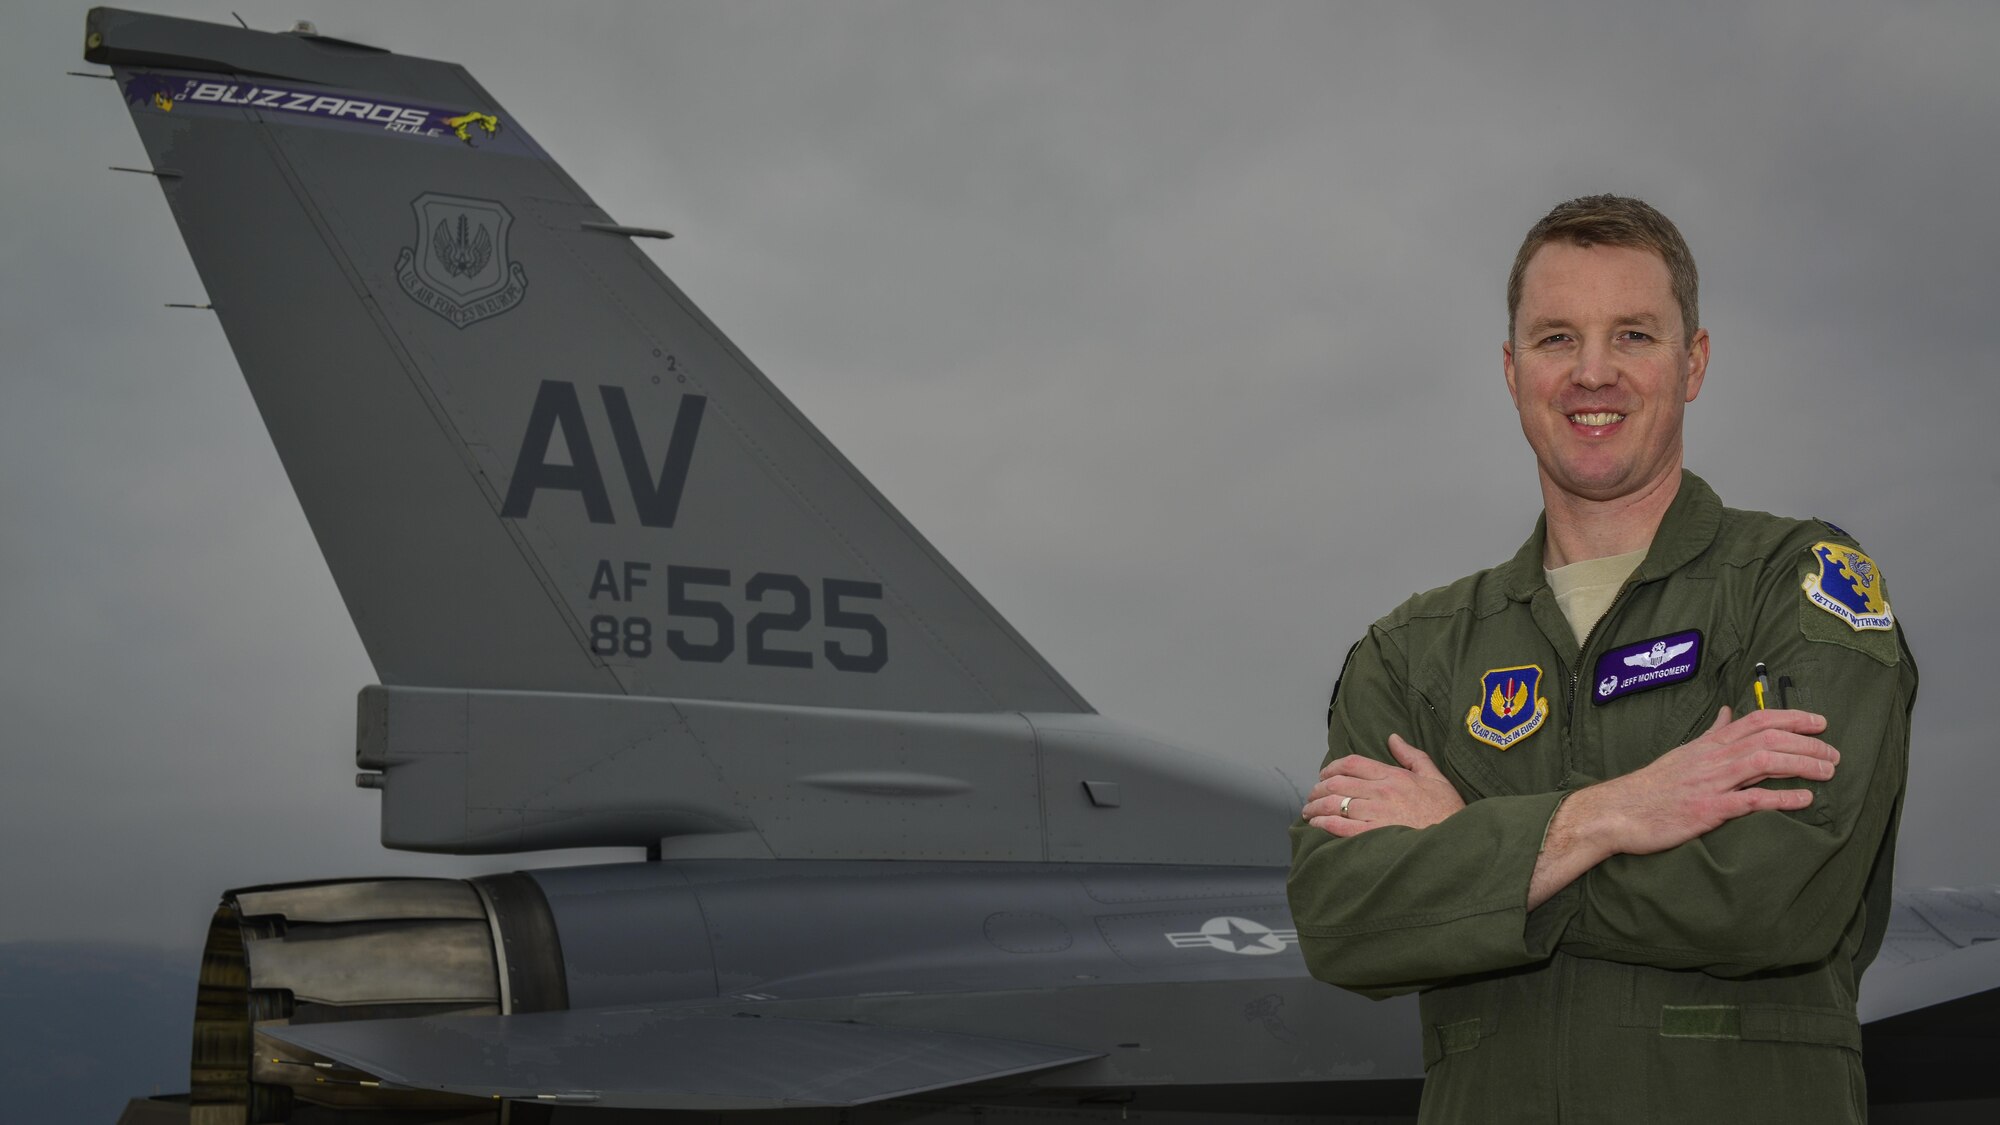 Lt. Col. Jeff Montgomery, 510th Fighter Squadron commander, poses for a photo on Feb. 8, 2017, at Aviano Air Base, Italy. (U.S. Air Force photo by Senior Airman Cory W. Bush)